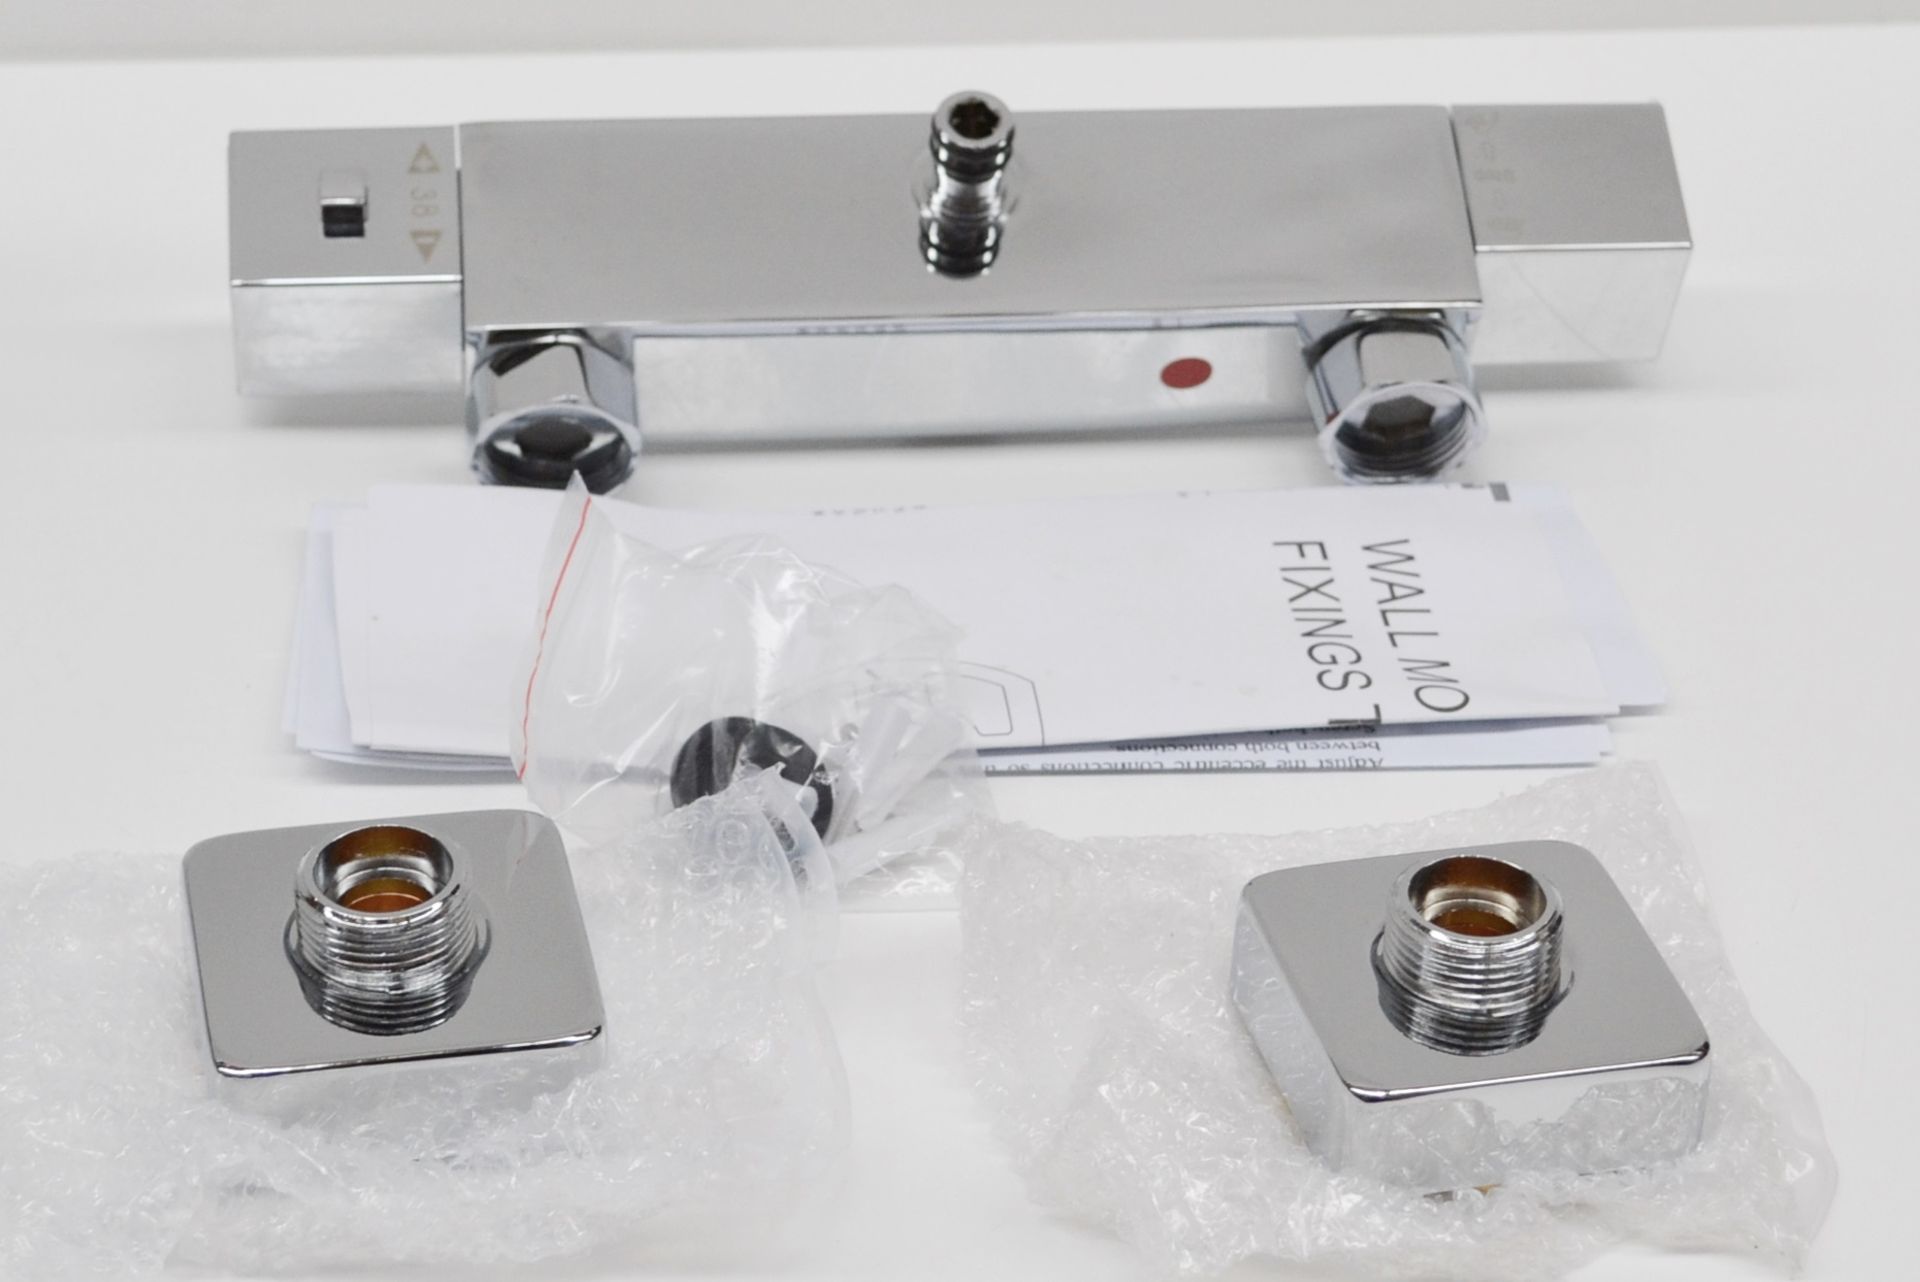 1 x TETRA Square Head Thermostatic Shower Riser Kit - CILISS7 - Ref: MBI005 - CL190 - Unused Boxed - Image 9 of 10